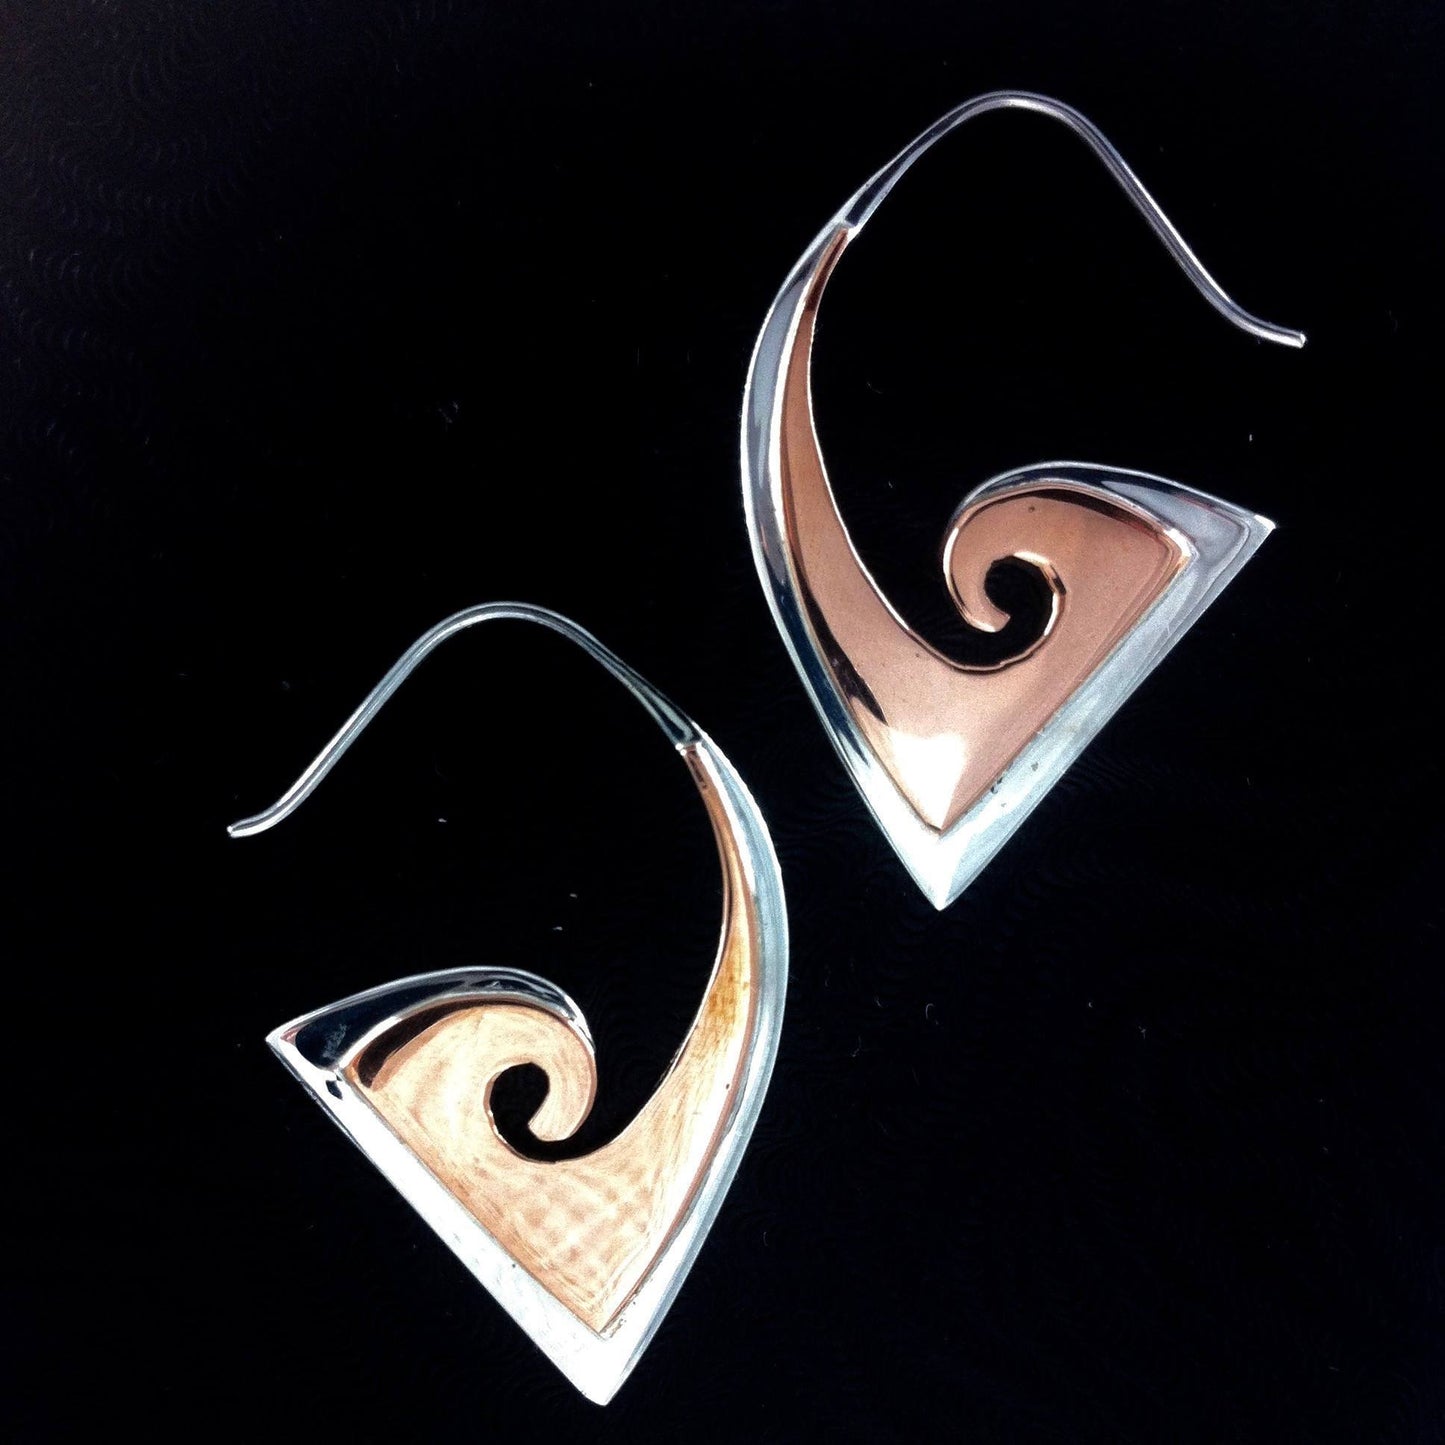 Tribal Earrings :|: Curved Angle. sterling silver with copper highlights earrings. | Tribal Silver Earrings